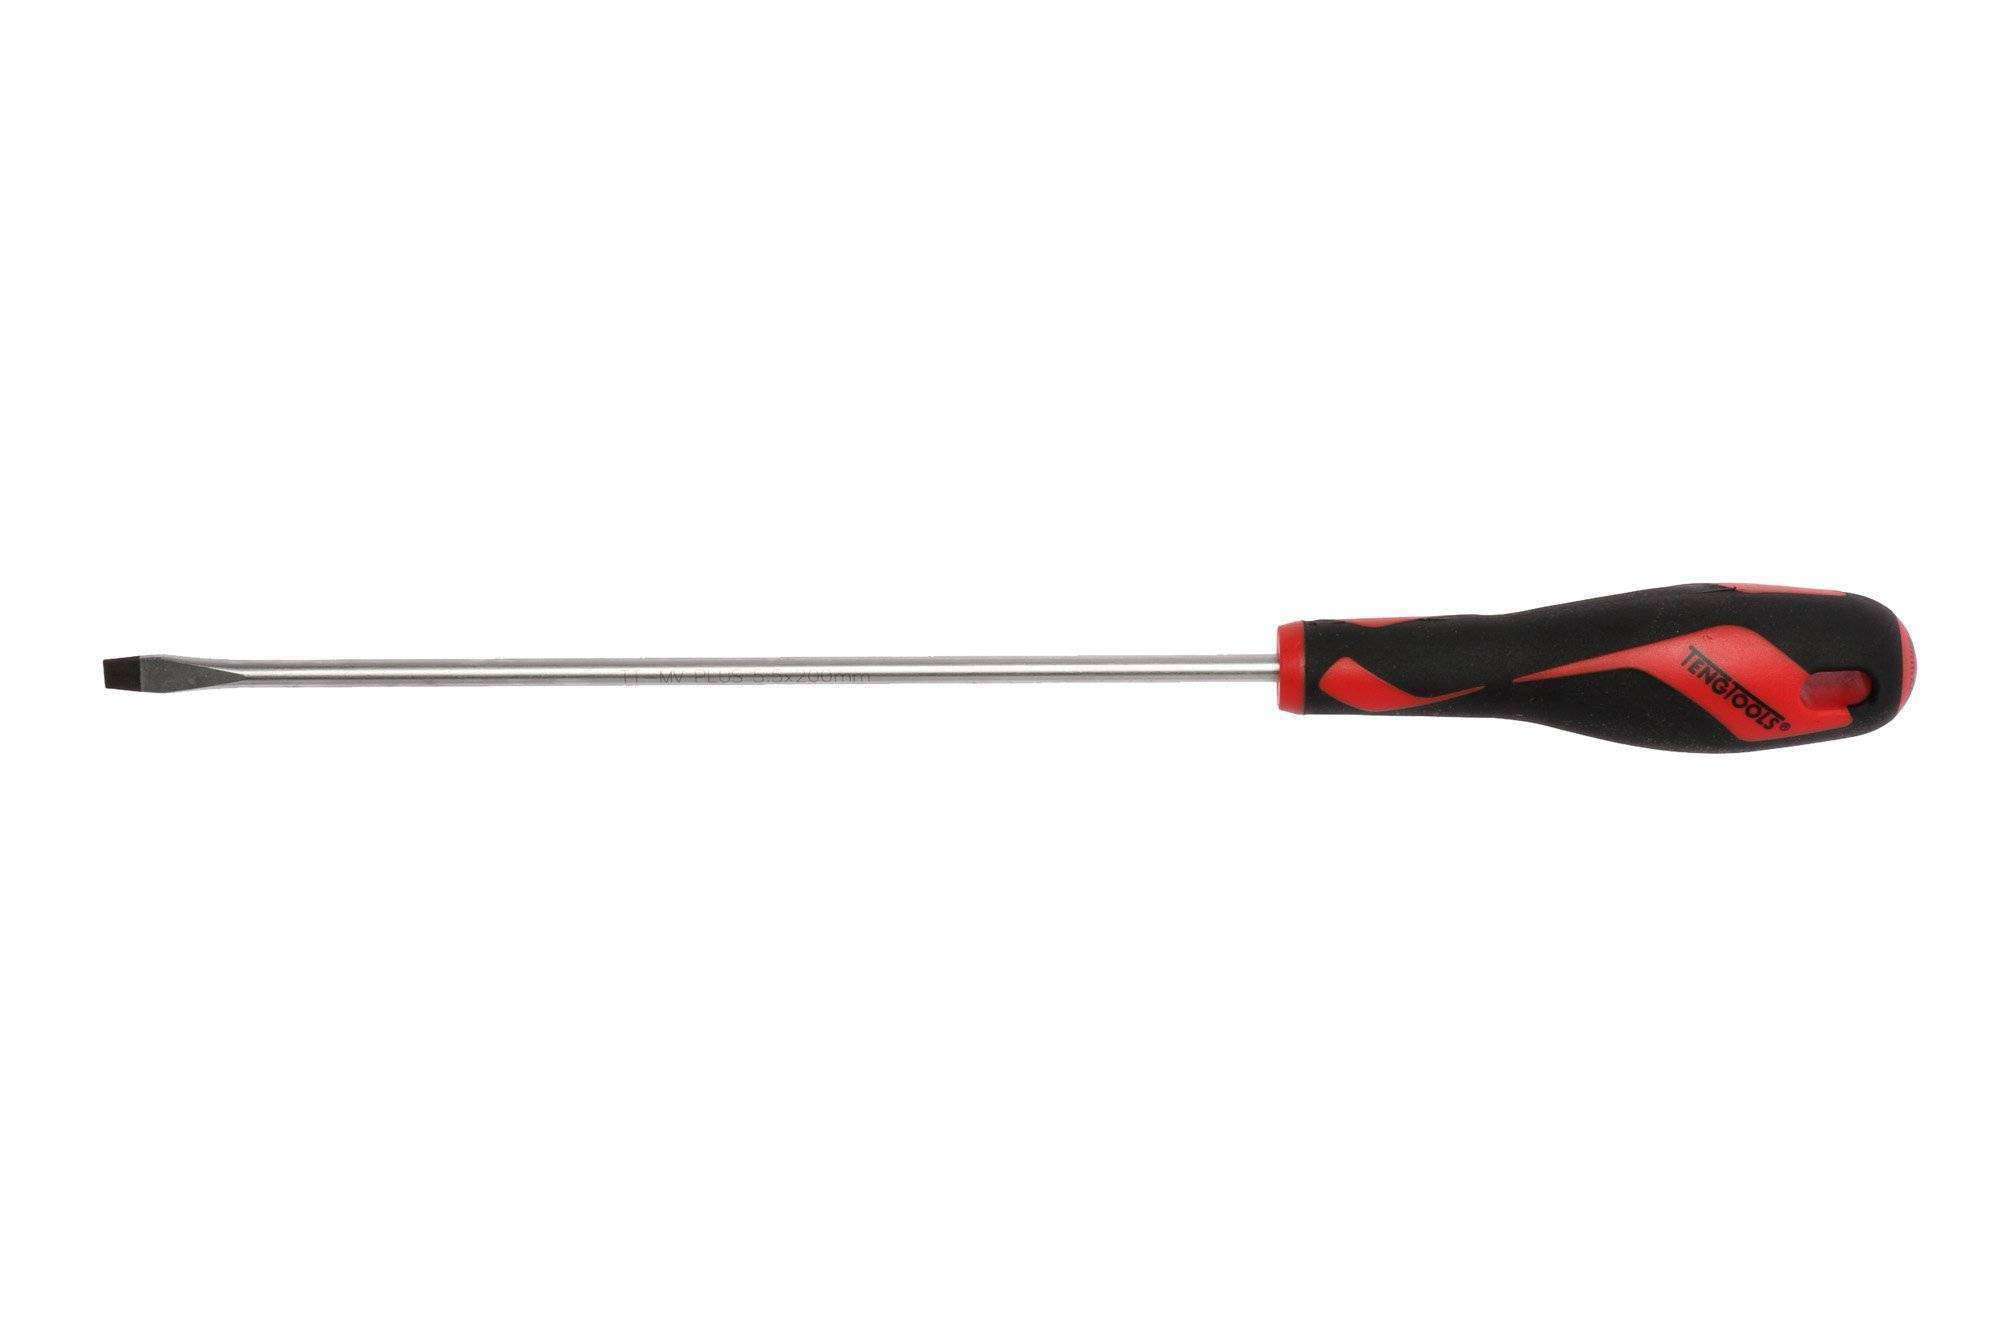 Teng Tools 5.5mm / 7/32 Inch x 200mm / 7.9 Inch Long Flat Type Slotted Head Screwdriver - MD923N1